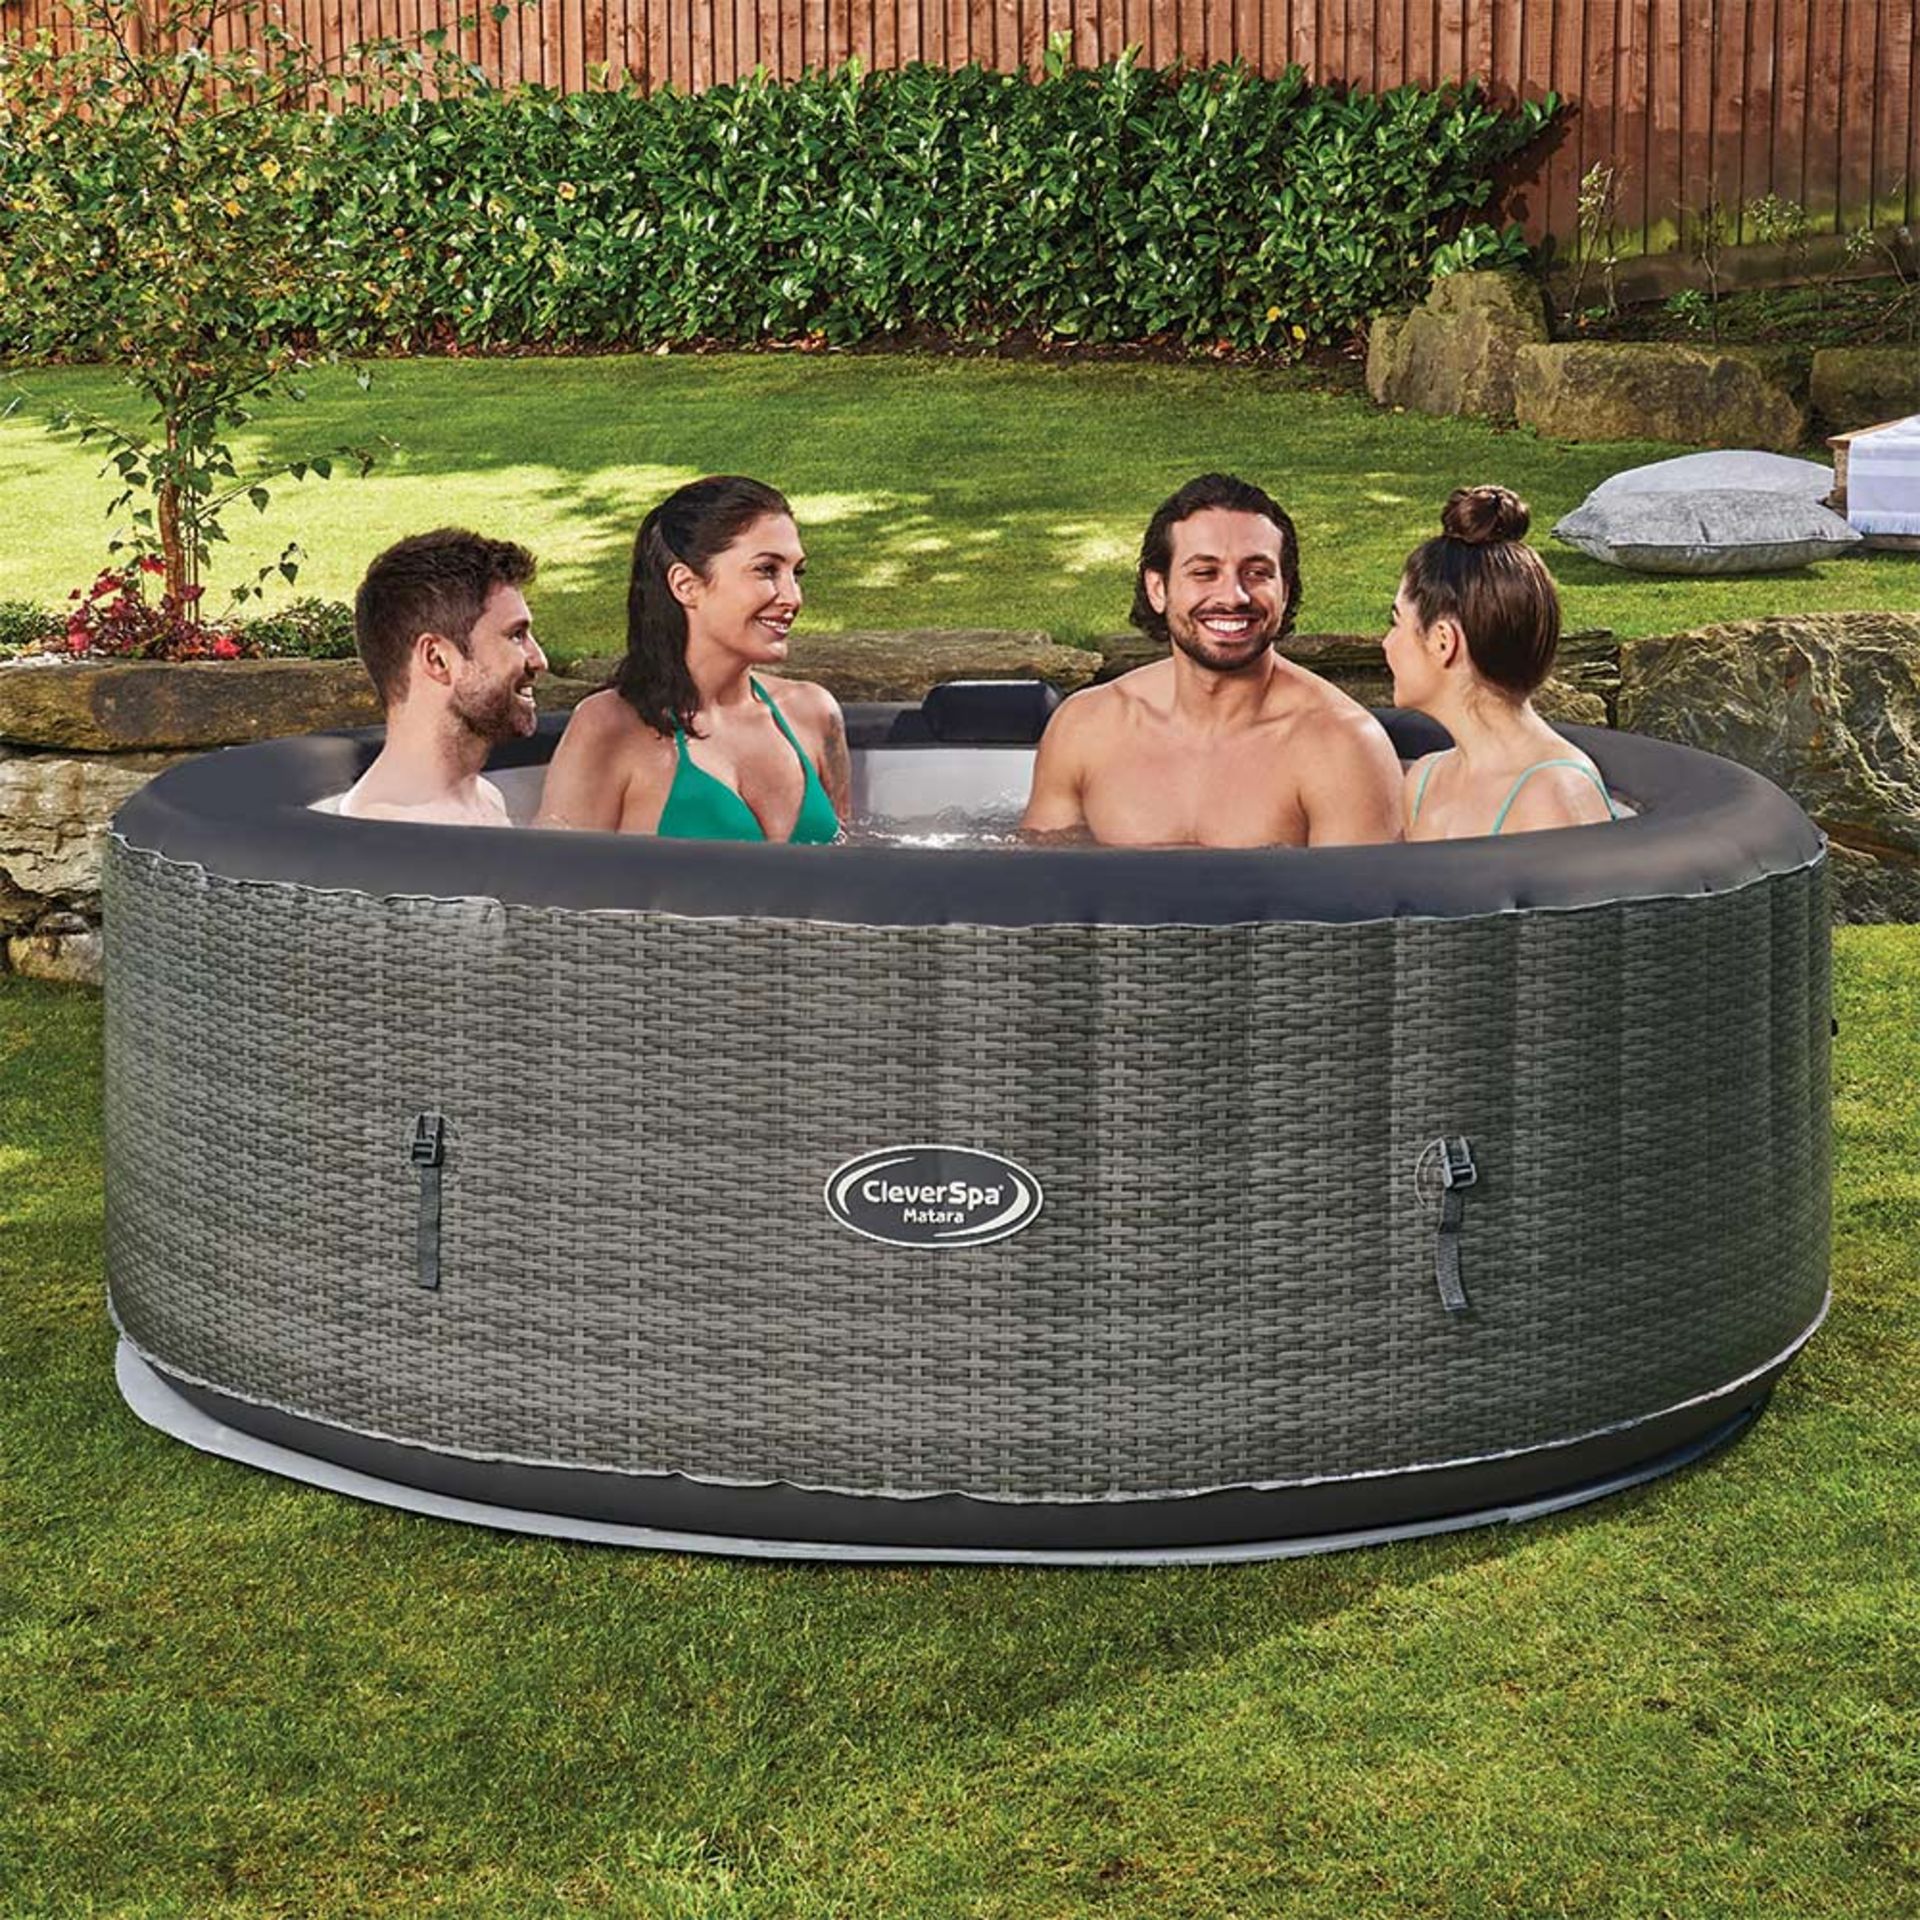 1x Clever Spa Matara RRP £500. 6 Person Inflatable 130 Air Jet Hot Tub. Unit Turns On & Inflates. W